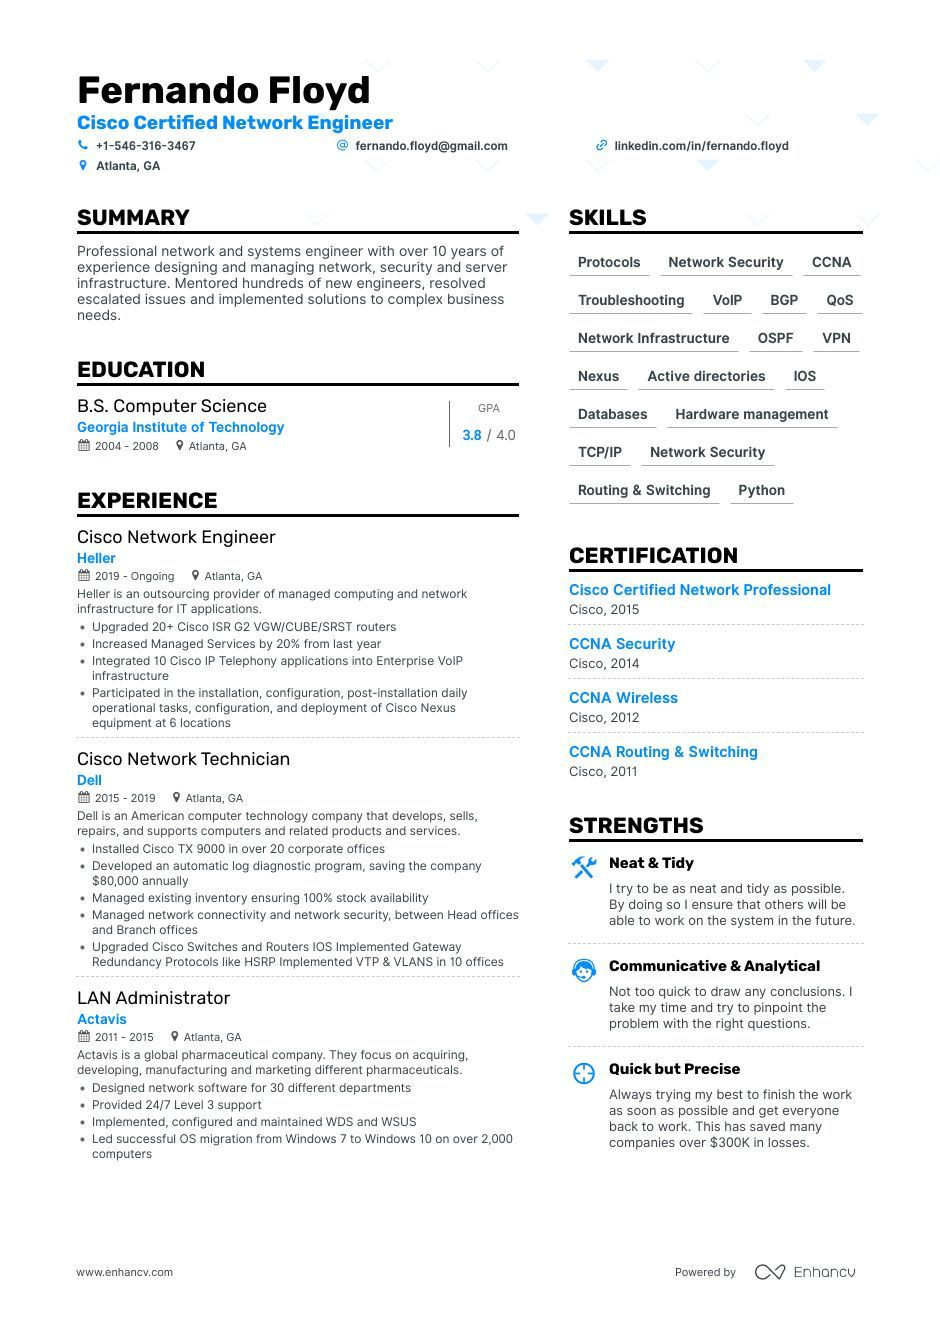 Sample Objextive Statements for Resume It Networking Network Engineer Resume Samples and Writing Guide for 2022 (layout …